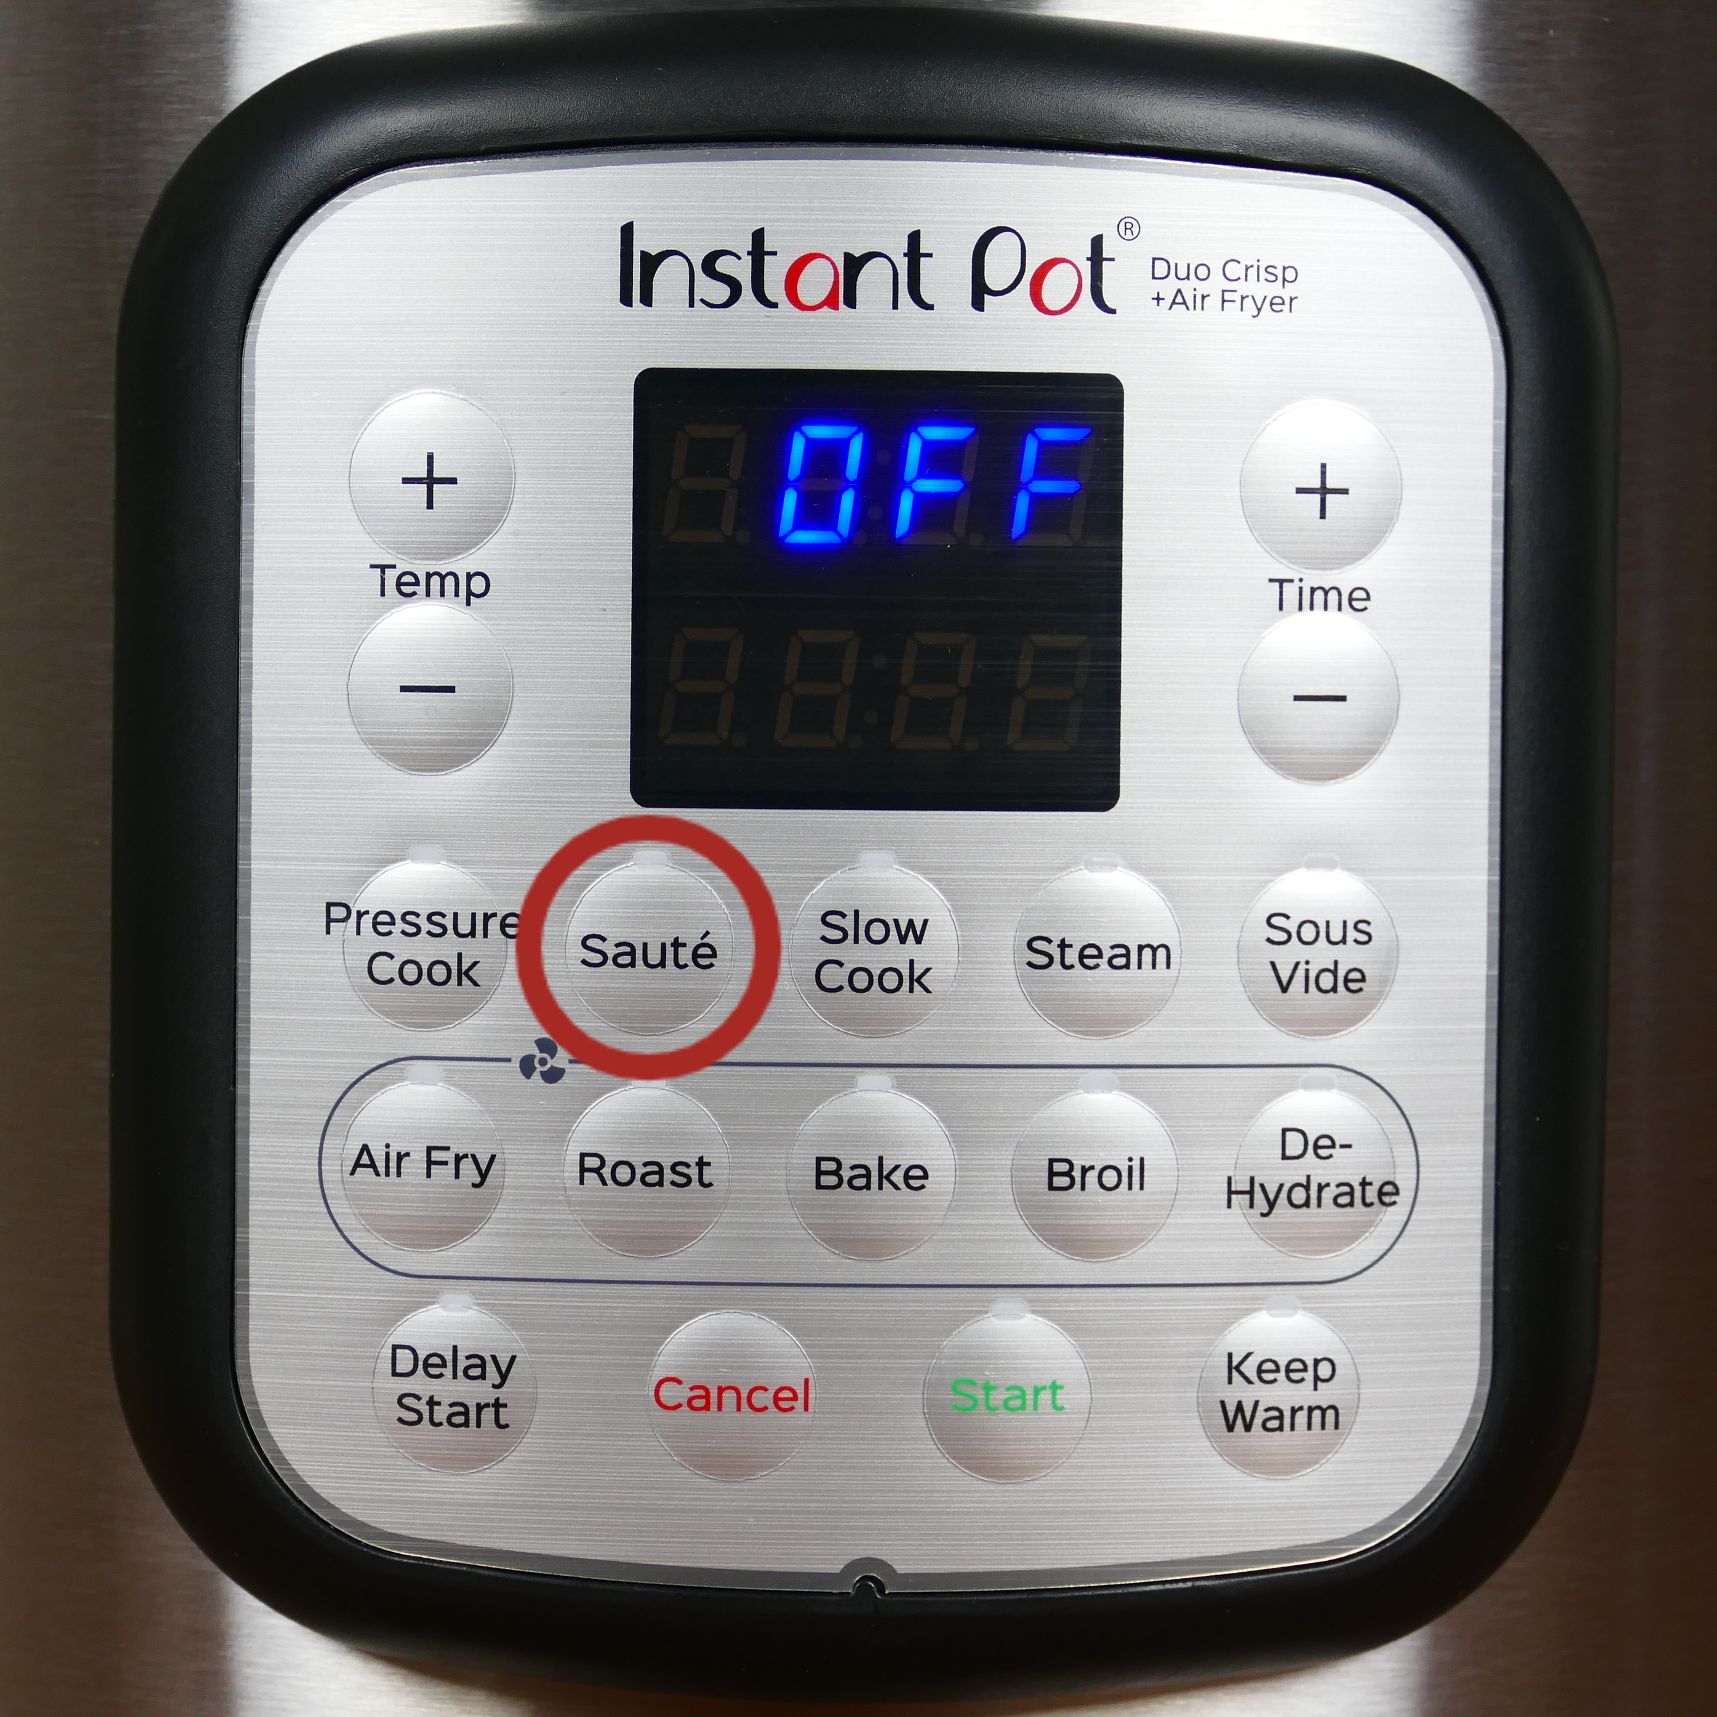 Instant Pot Duo Crisp Display Panel Saute button circled in red